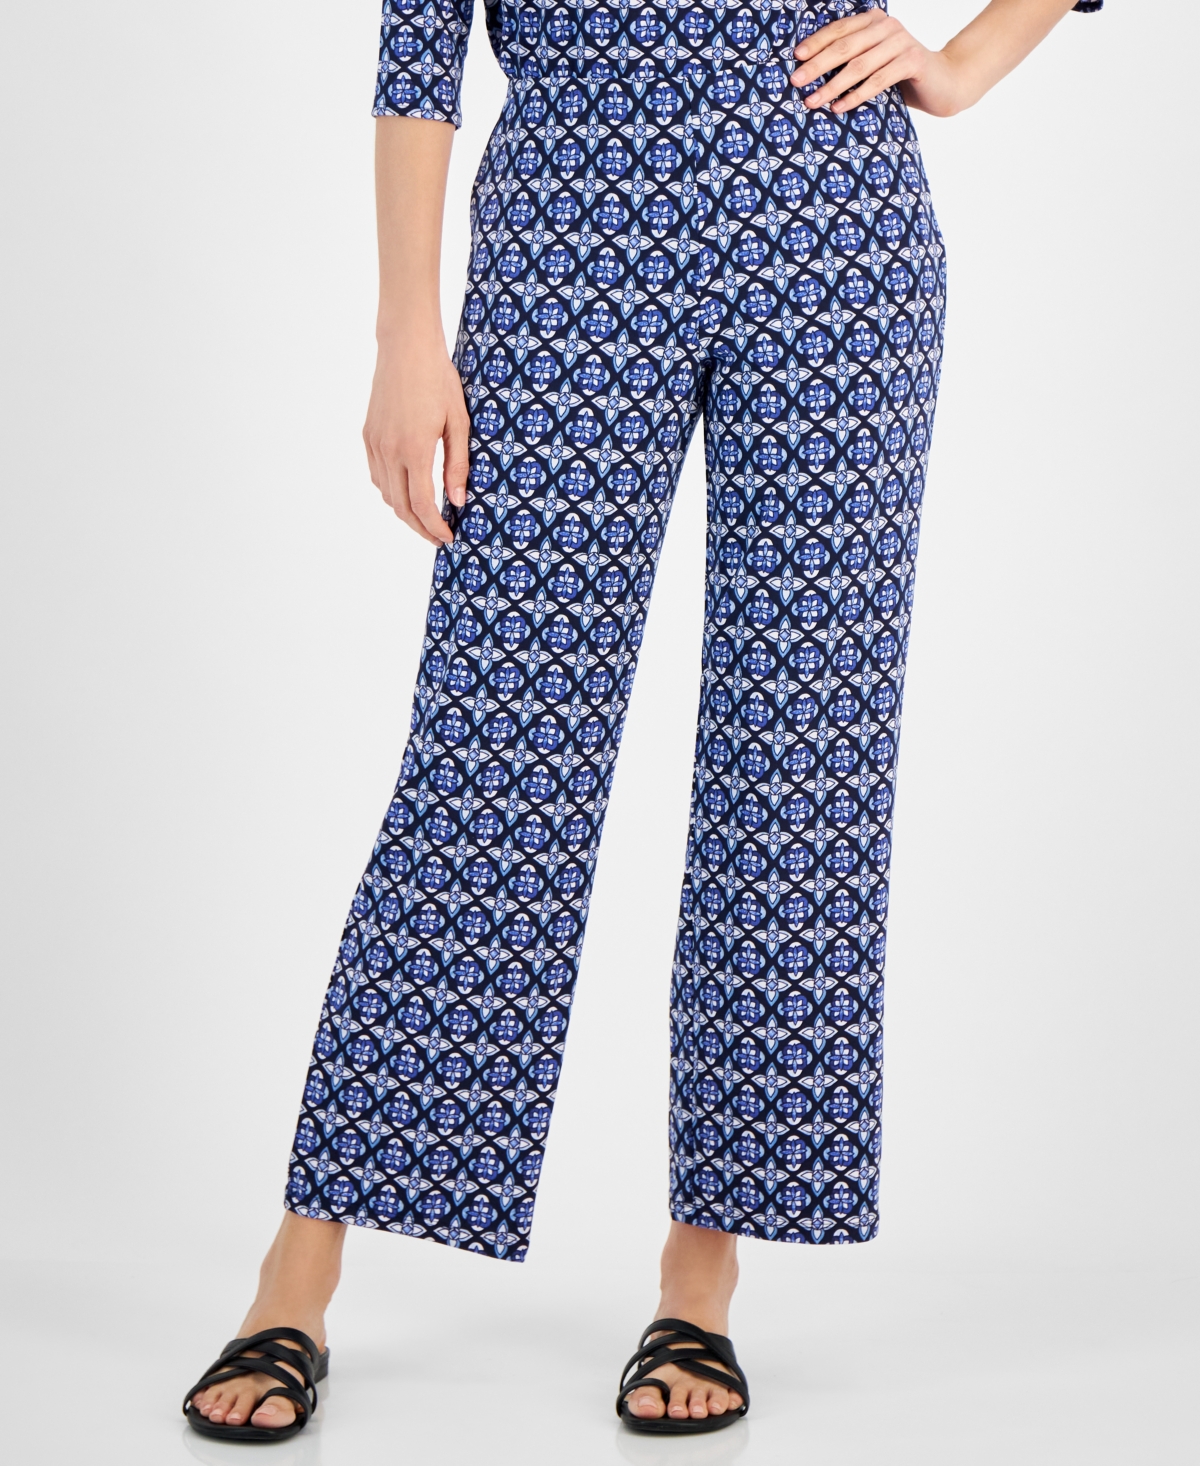 Petite Francesca Pull-On Foulard Knit Pants, Created for Macy's - Intrepid Blue Combo